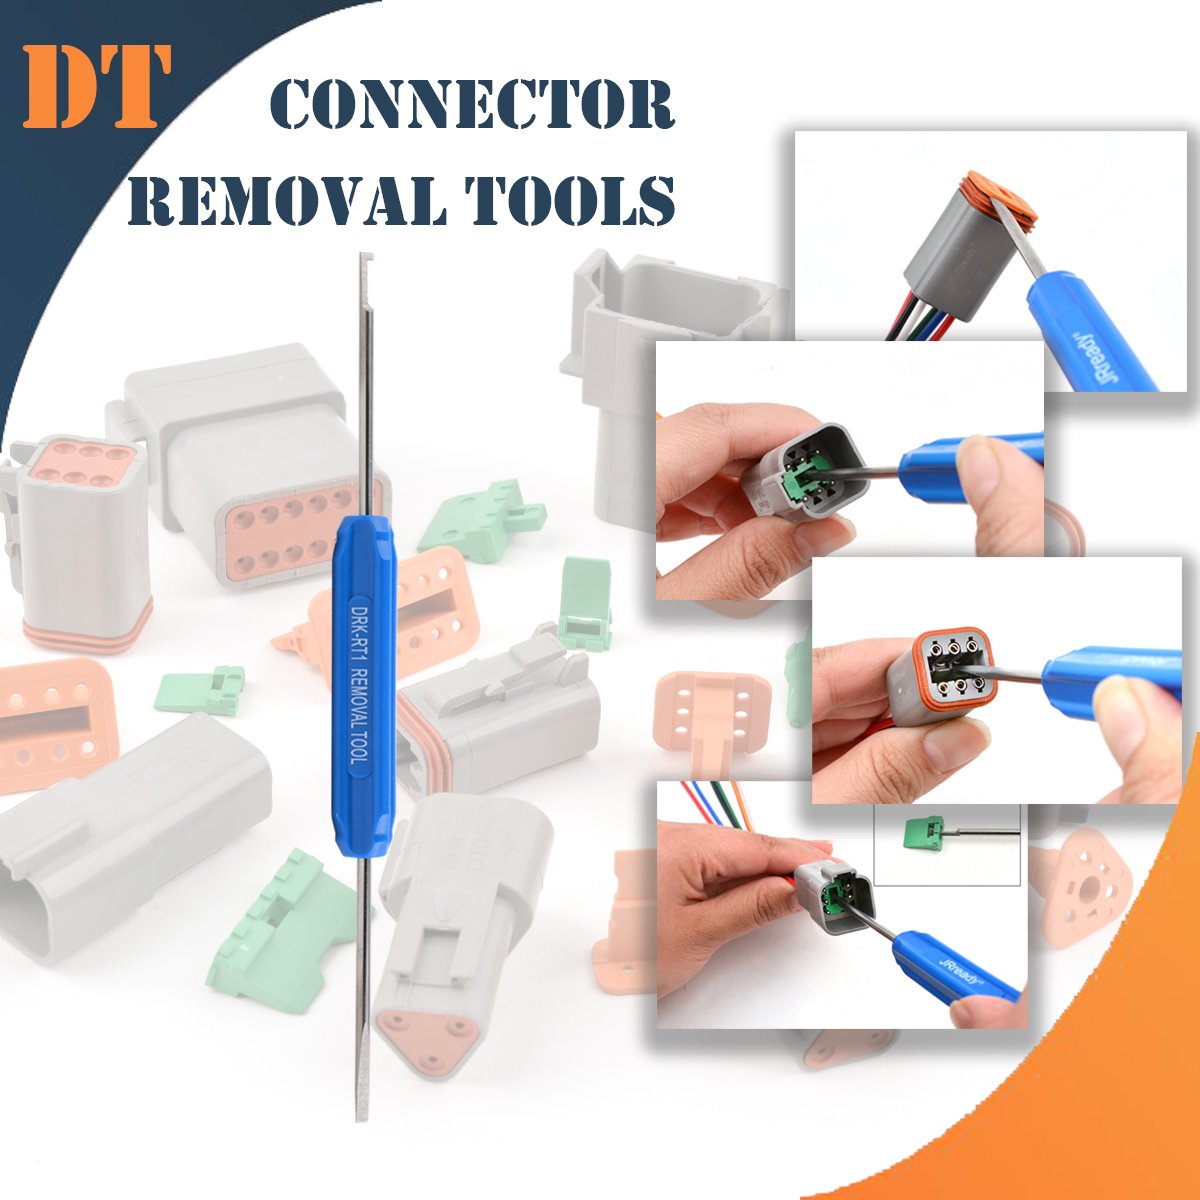 JRready JST6110 (520PCS) 2-12 Pin DT Connector Kit with JRD-HDT-48-00 (HDT-48-00) Crimp Tool Wire Size 12-22AWG, Send FREE GIFT: Connector / Contact / Removal tool kit